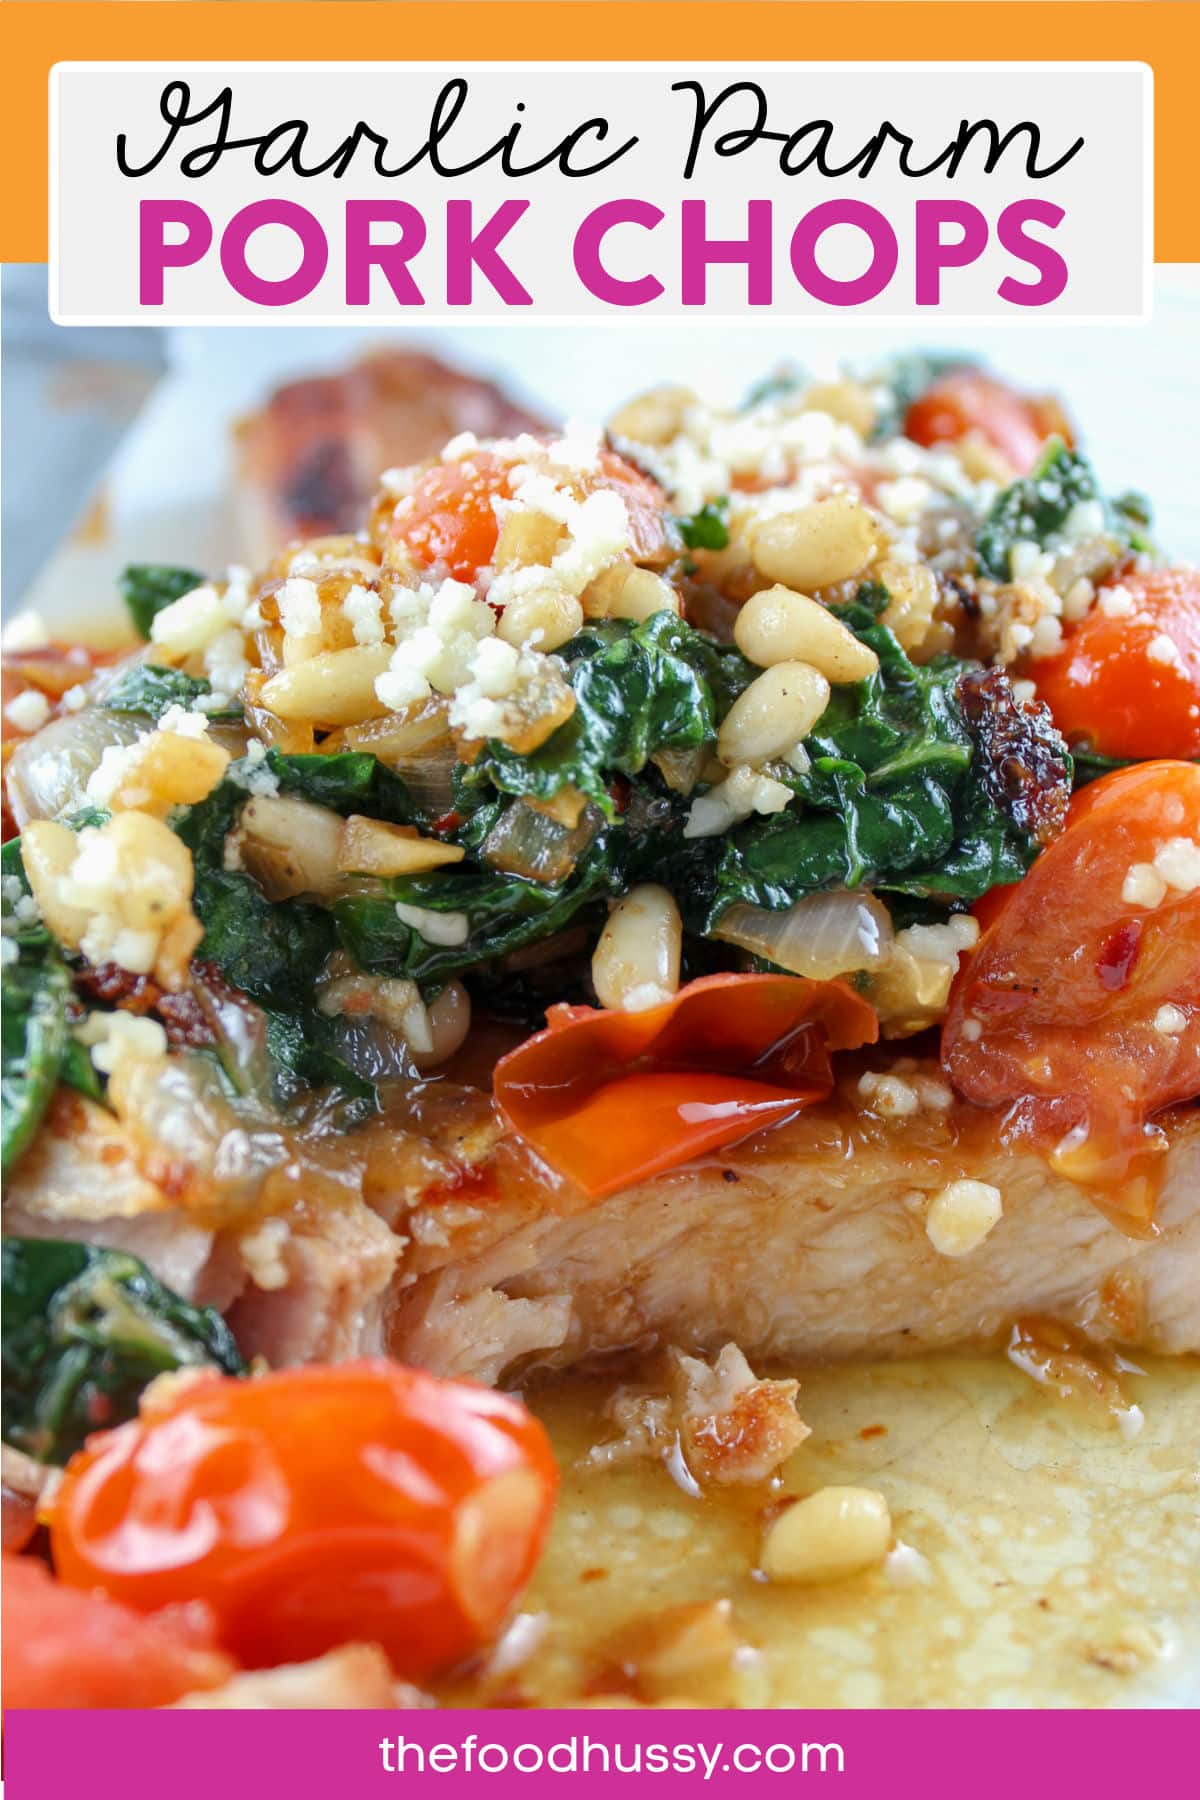 These Garlic Parmesan Pork Chops pack in a ton of flavor and are a 15 minute one-pan meal! Sautéed in garlic butter and topped with tomatoes, Swiss Chard and a touch of Parmesan cheese. You will love every bite! via @foodhussy